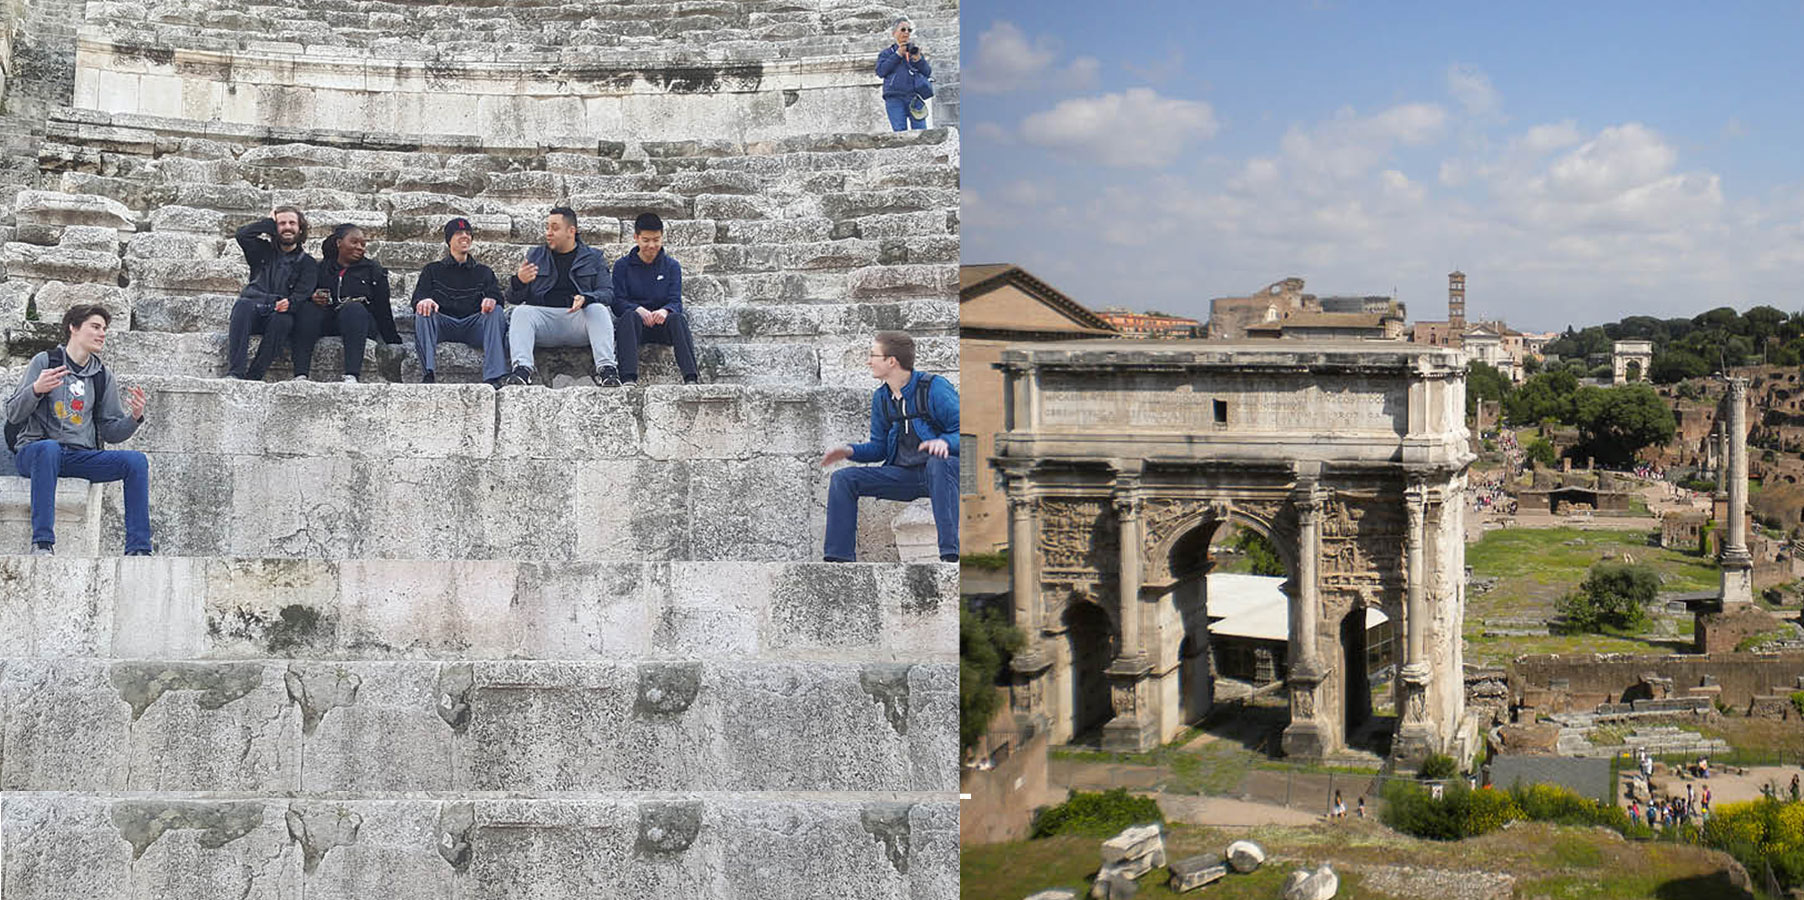 Images of students sitting on steps next to an image of France.